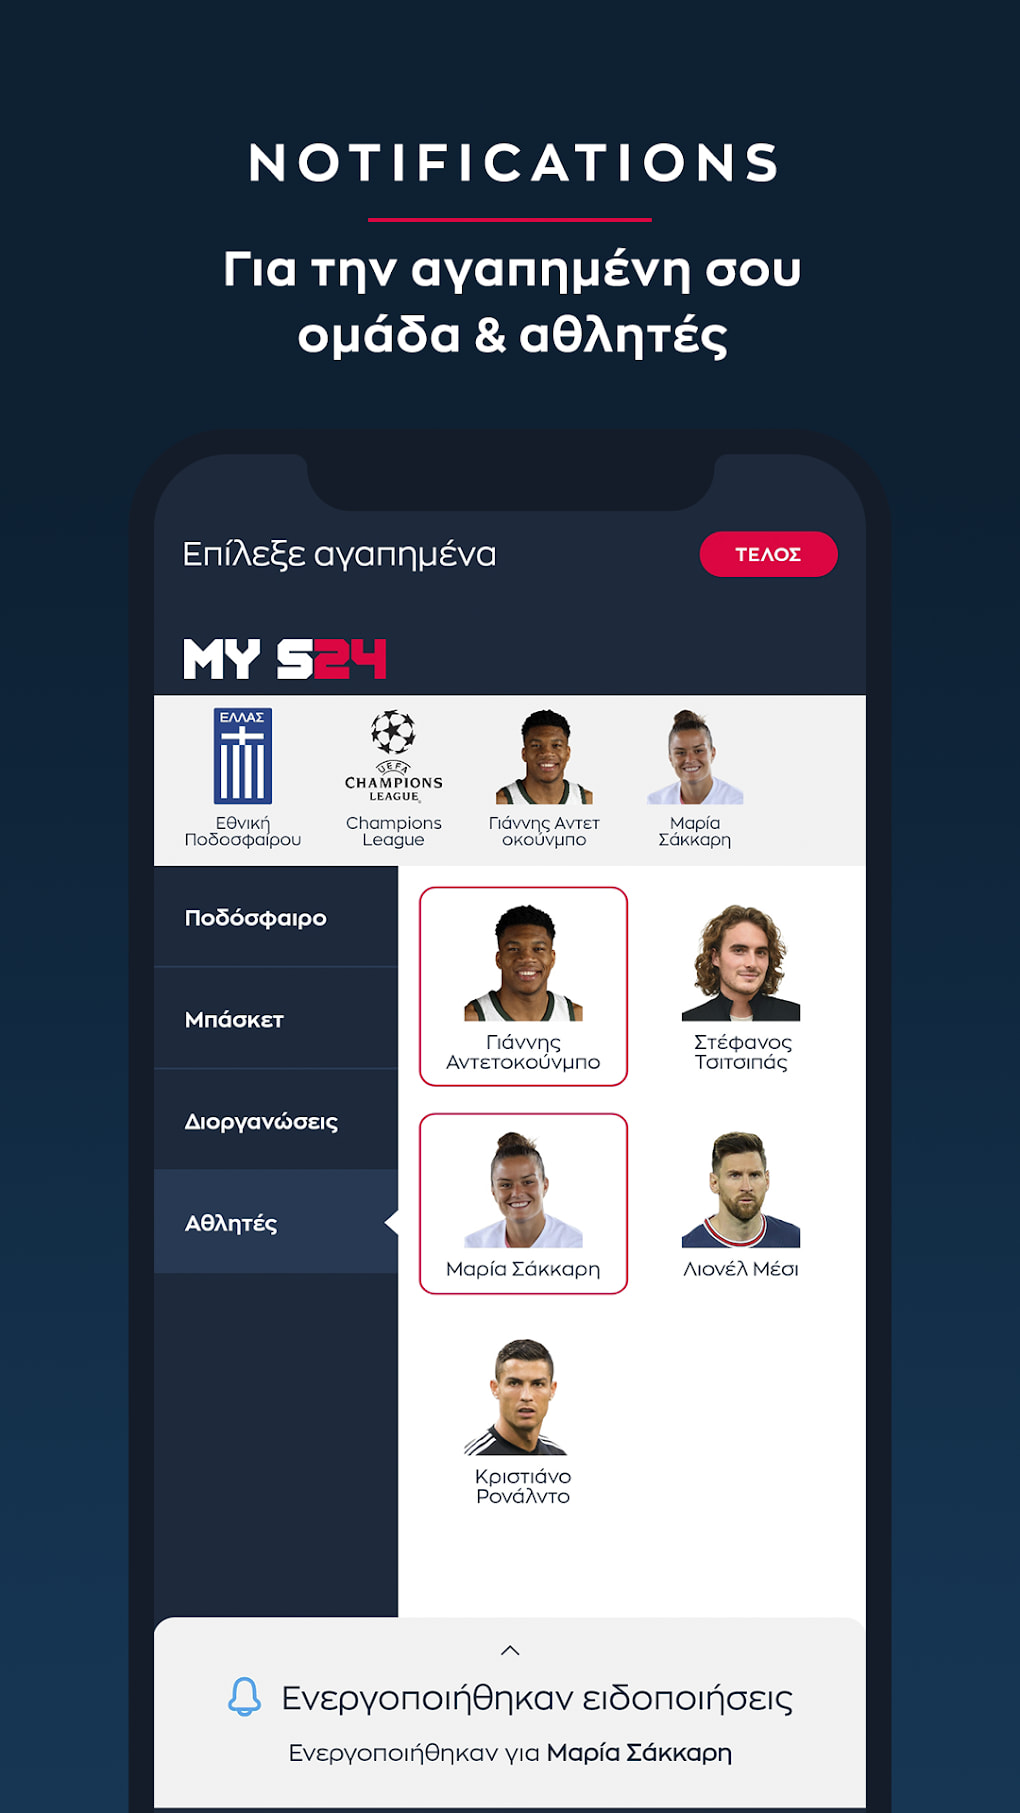 SPORT24 APK for Android